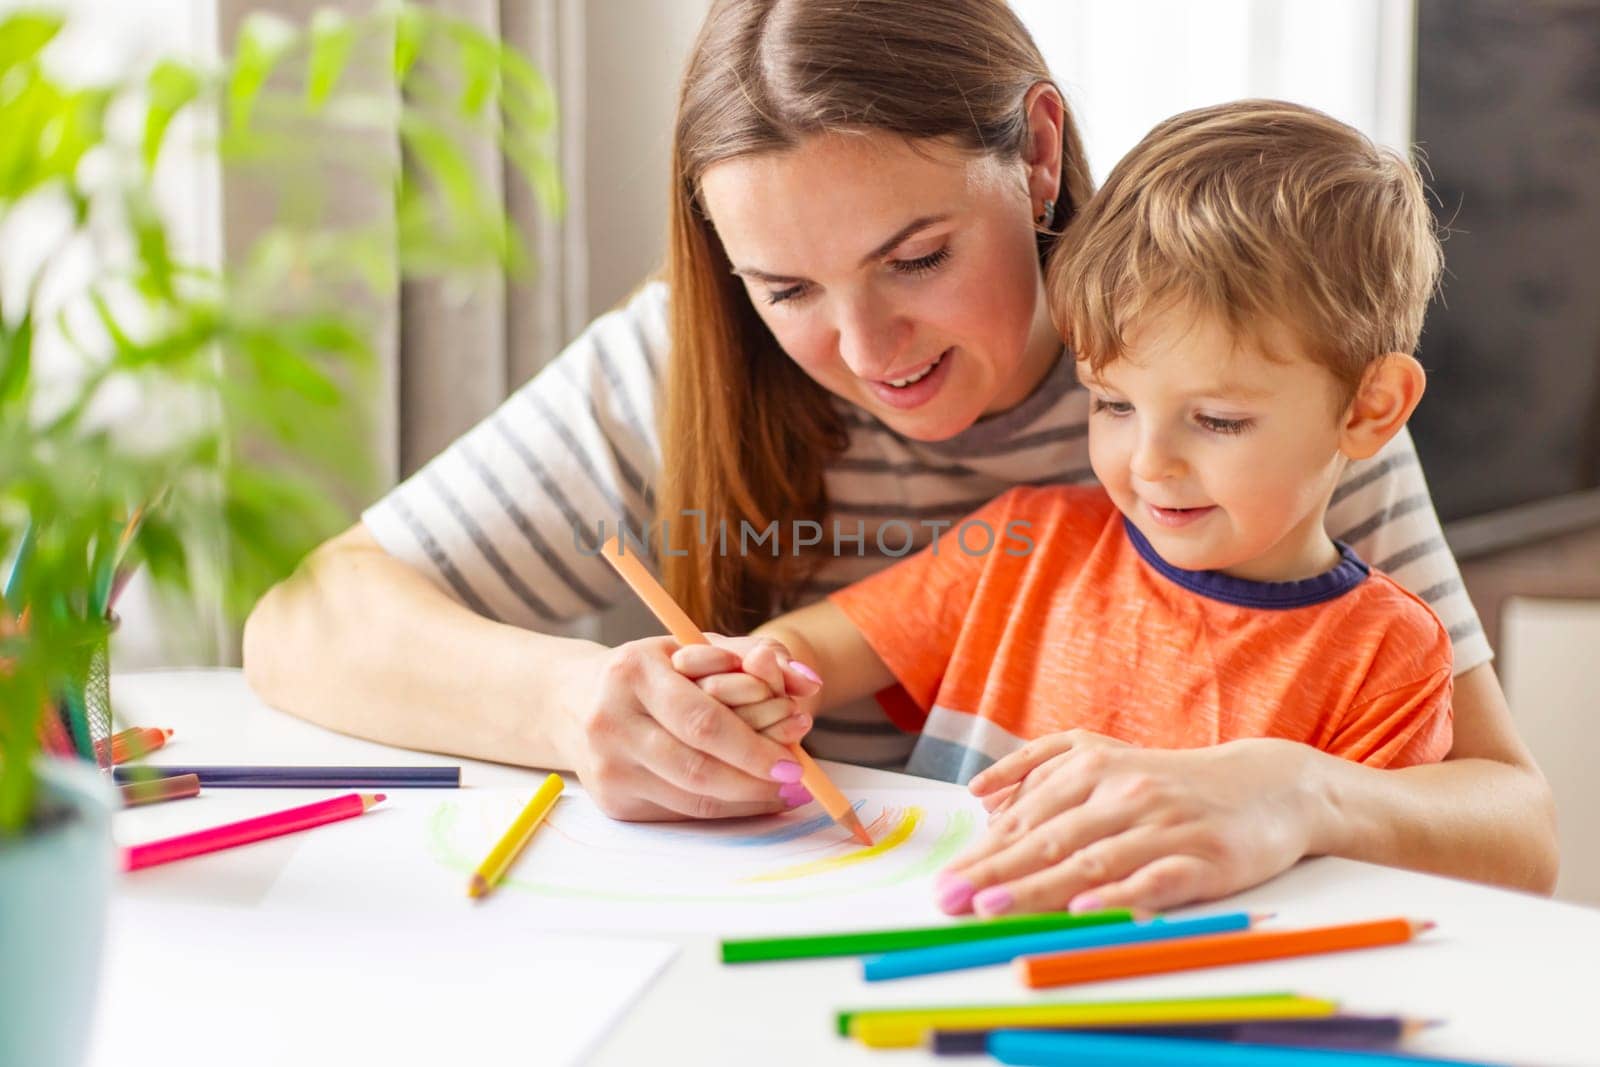 Happy family concept. Mother and her son drawing together. An adult woman helps a boy paint.